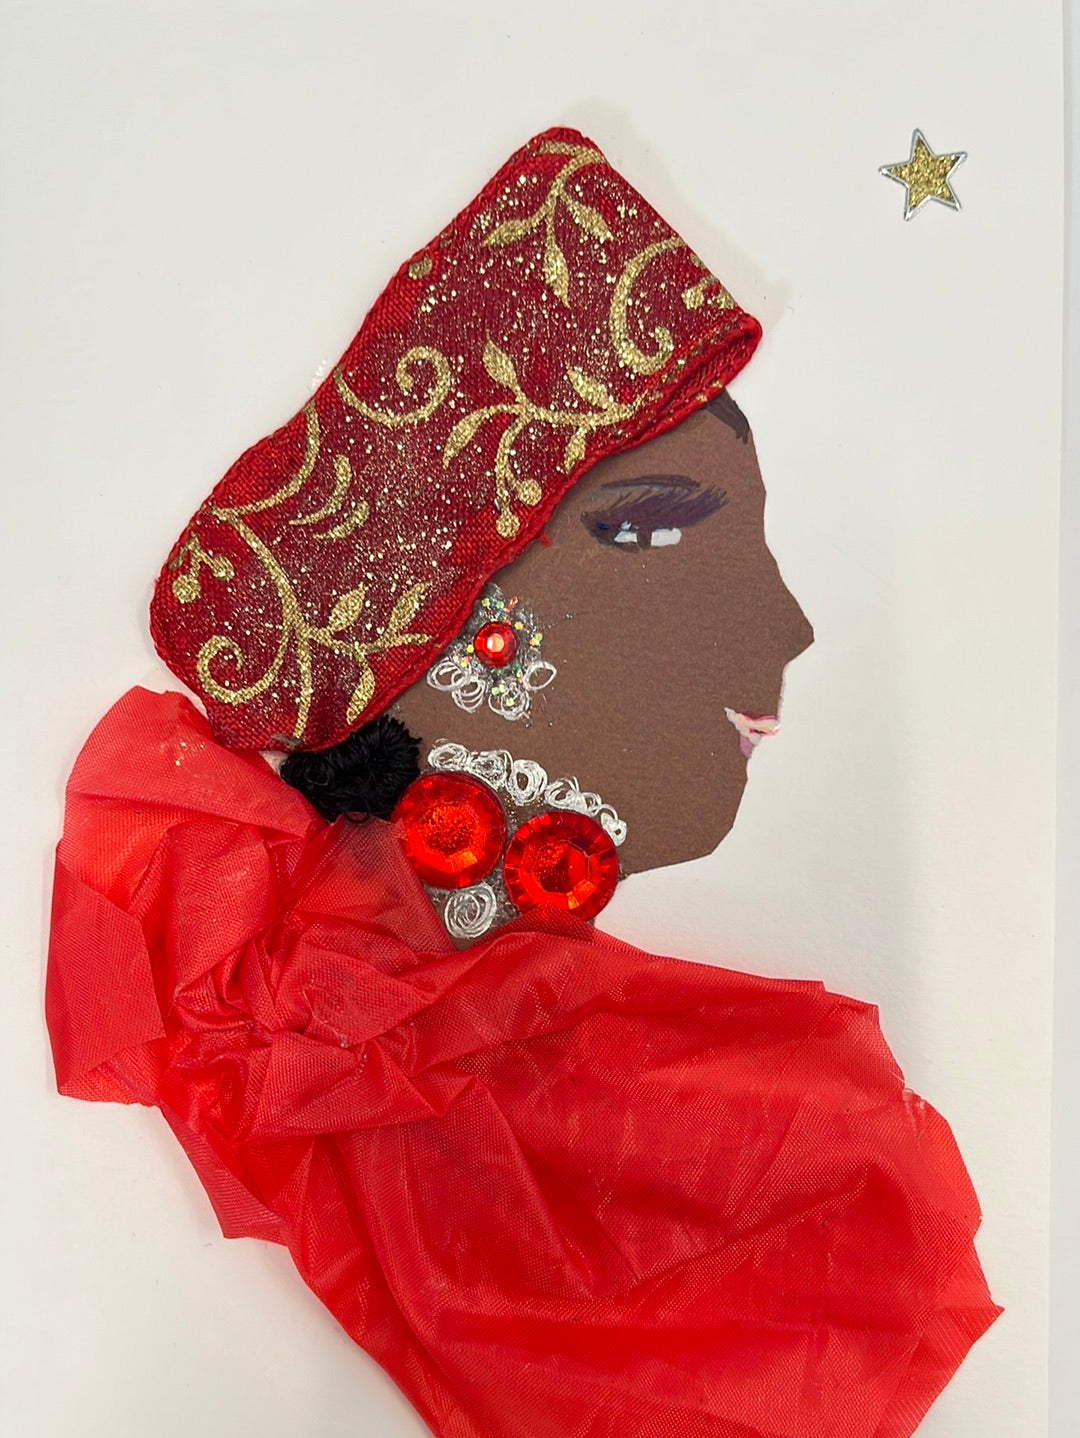 I designed this card of a woman named Abby Valentine. She has a brown skin tone and wears a red blouse and a red hat that has gold accents. In the righthand corner, there is a gold star. 